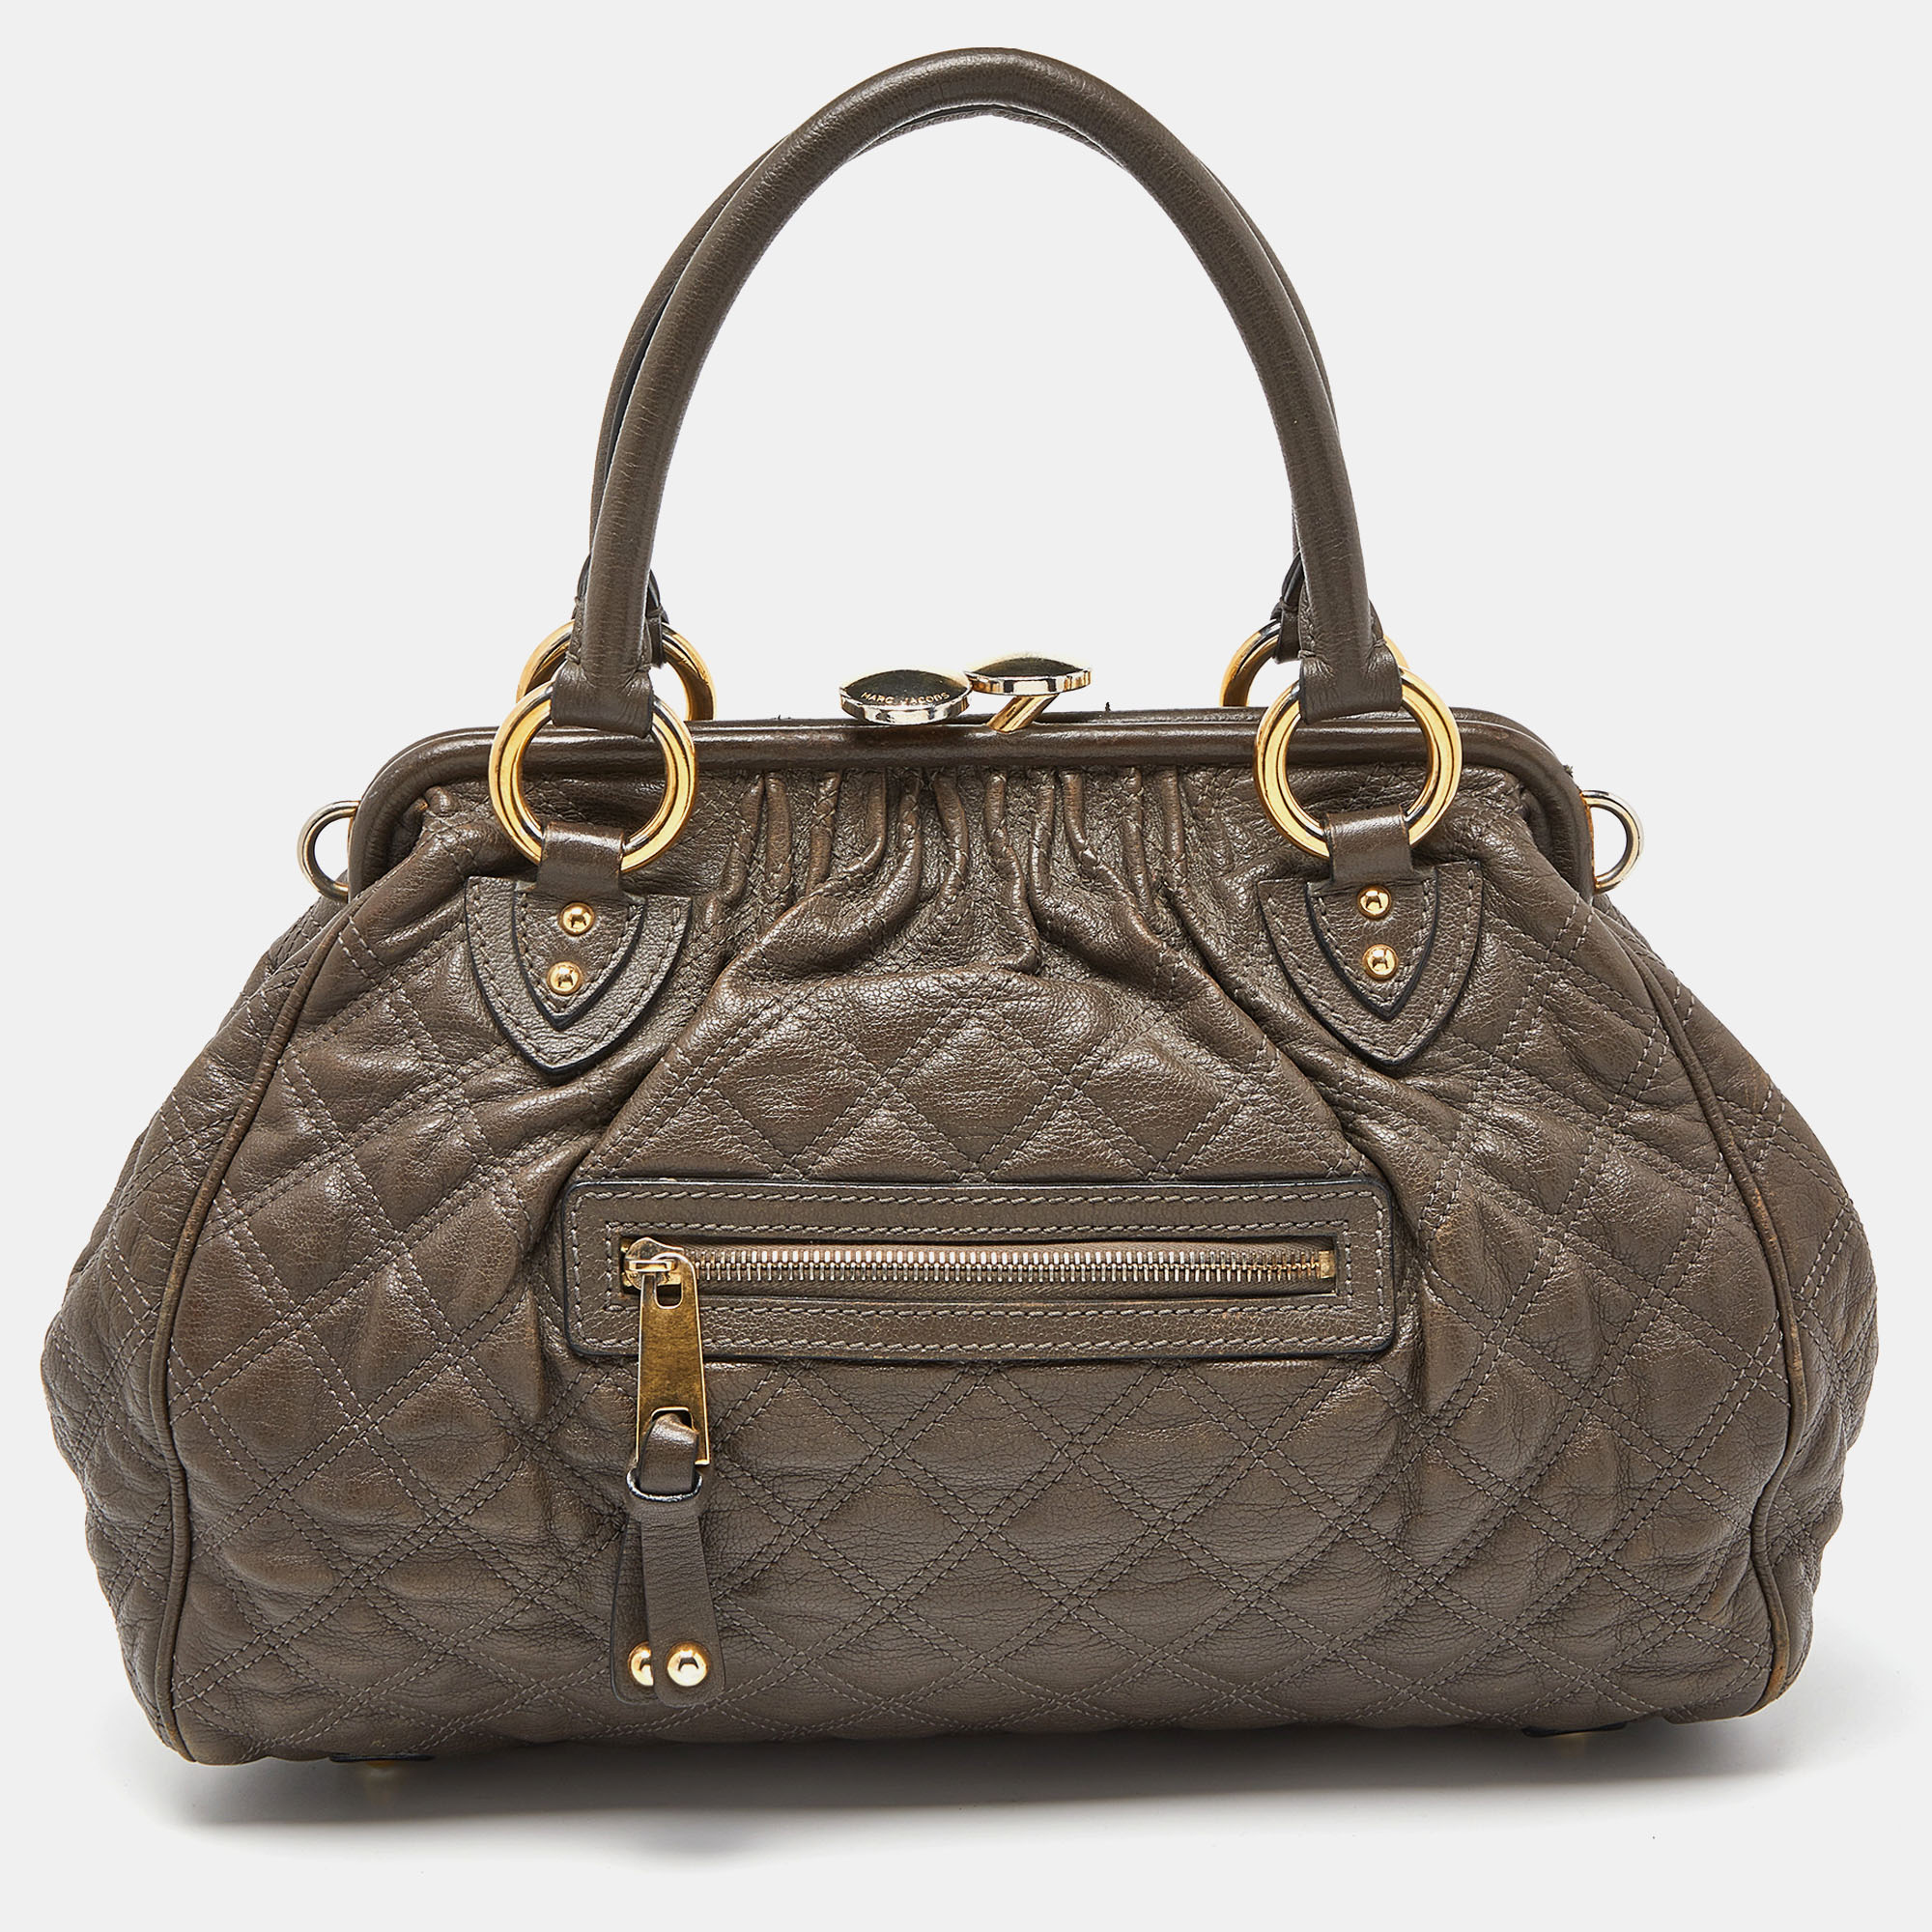 Pre-owned Marc Jacobs Khaki Beige Quilted Leather Stam Satchel